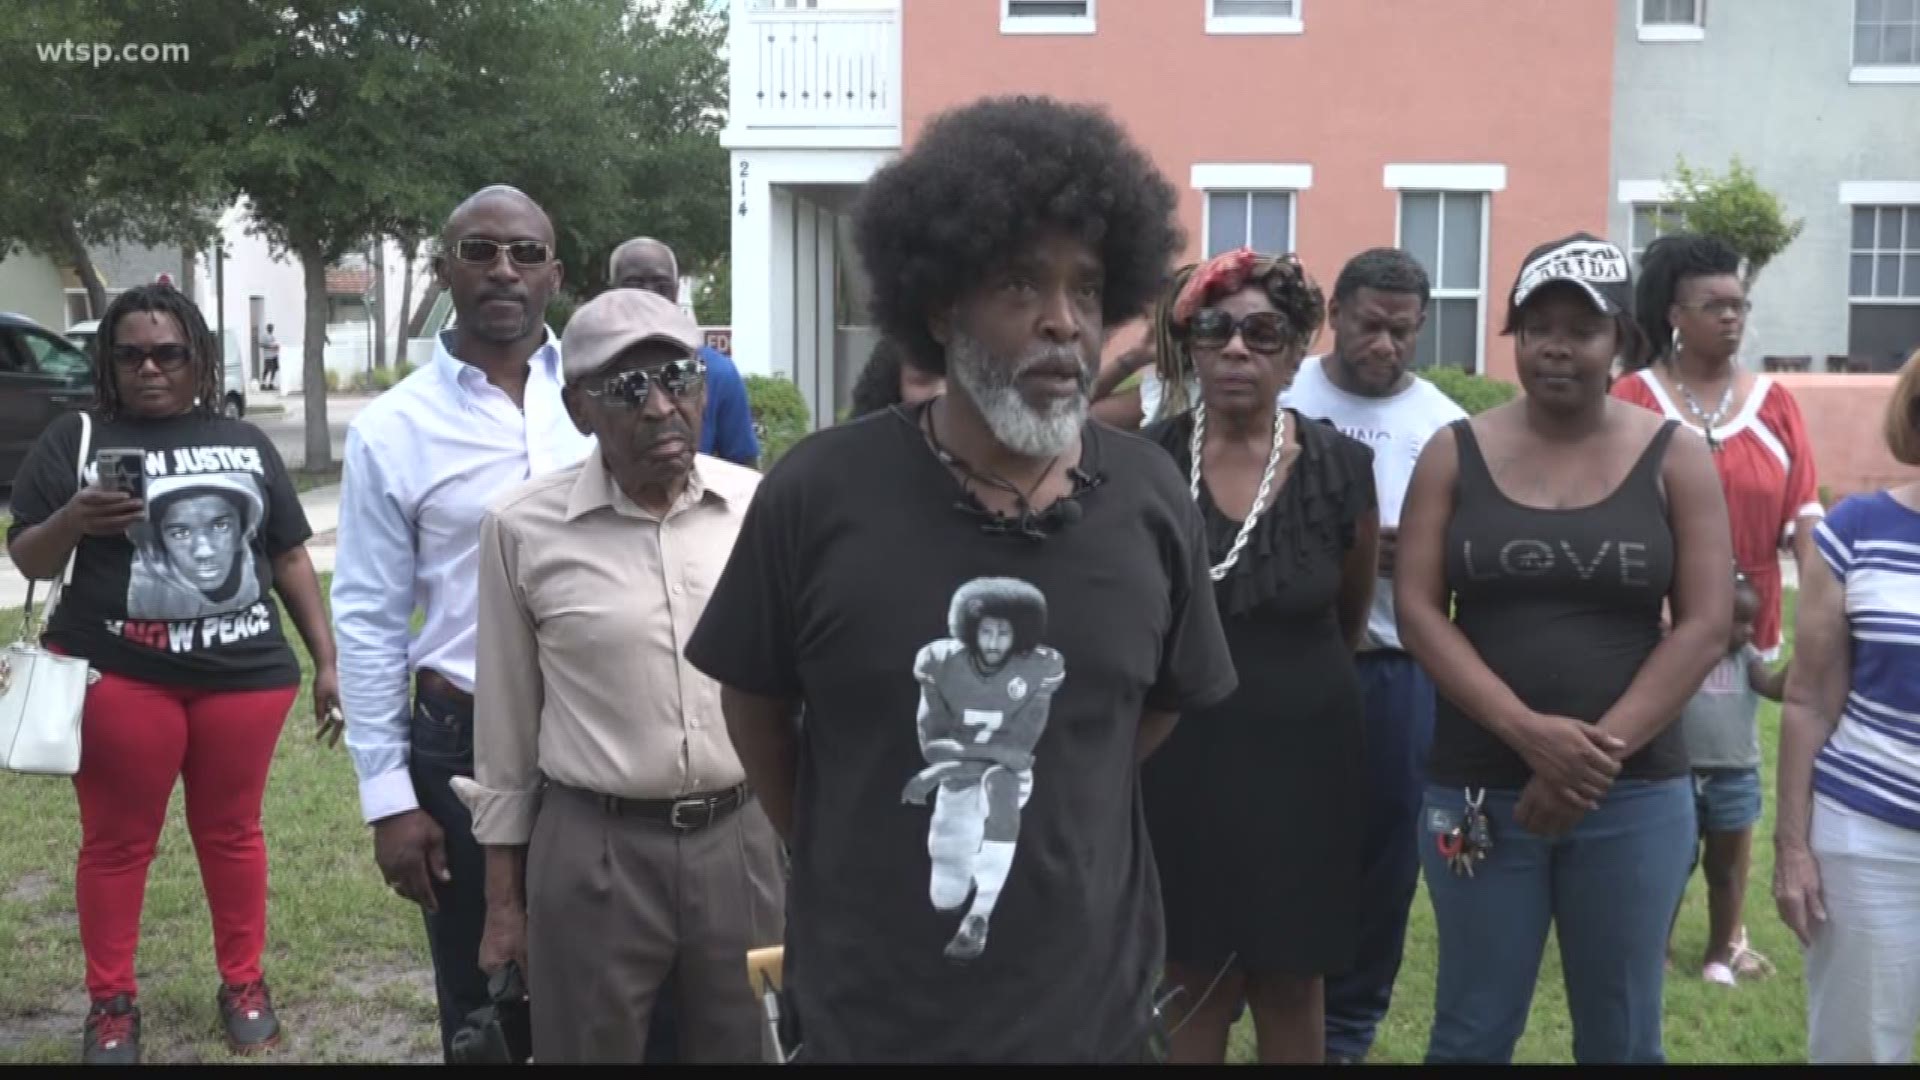 NAACP Manatee County President Rodney Jones claims a Bradenton police officer has been harassing him and his community.